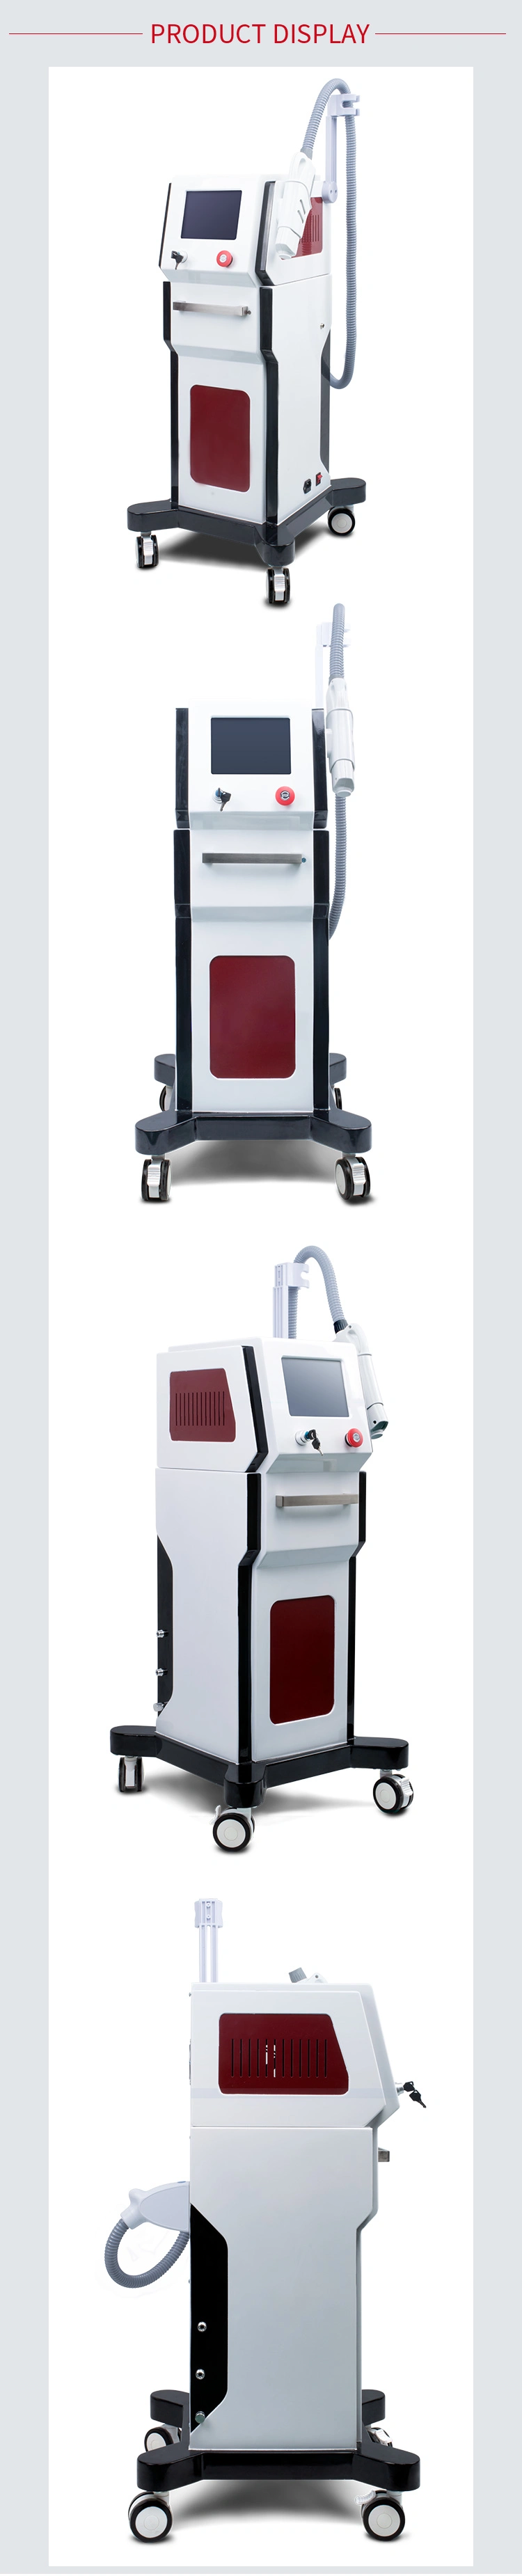 Professional Medical Equipment Q-Switch ND YAG Laser Tattoo Removal Equipmente Beauty Machine